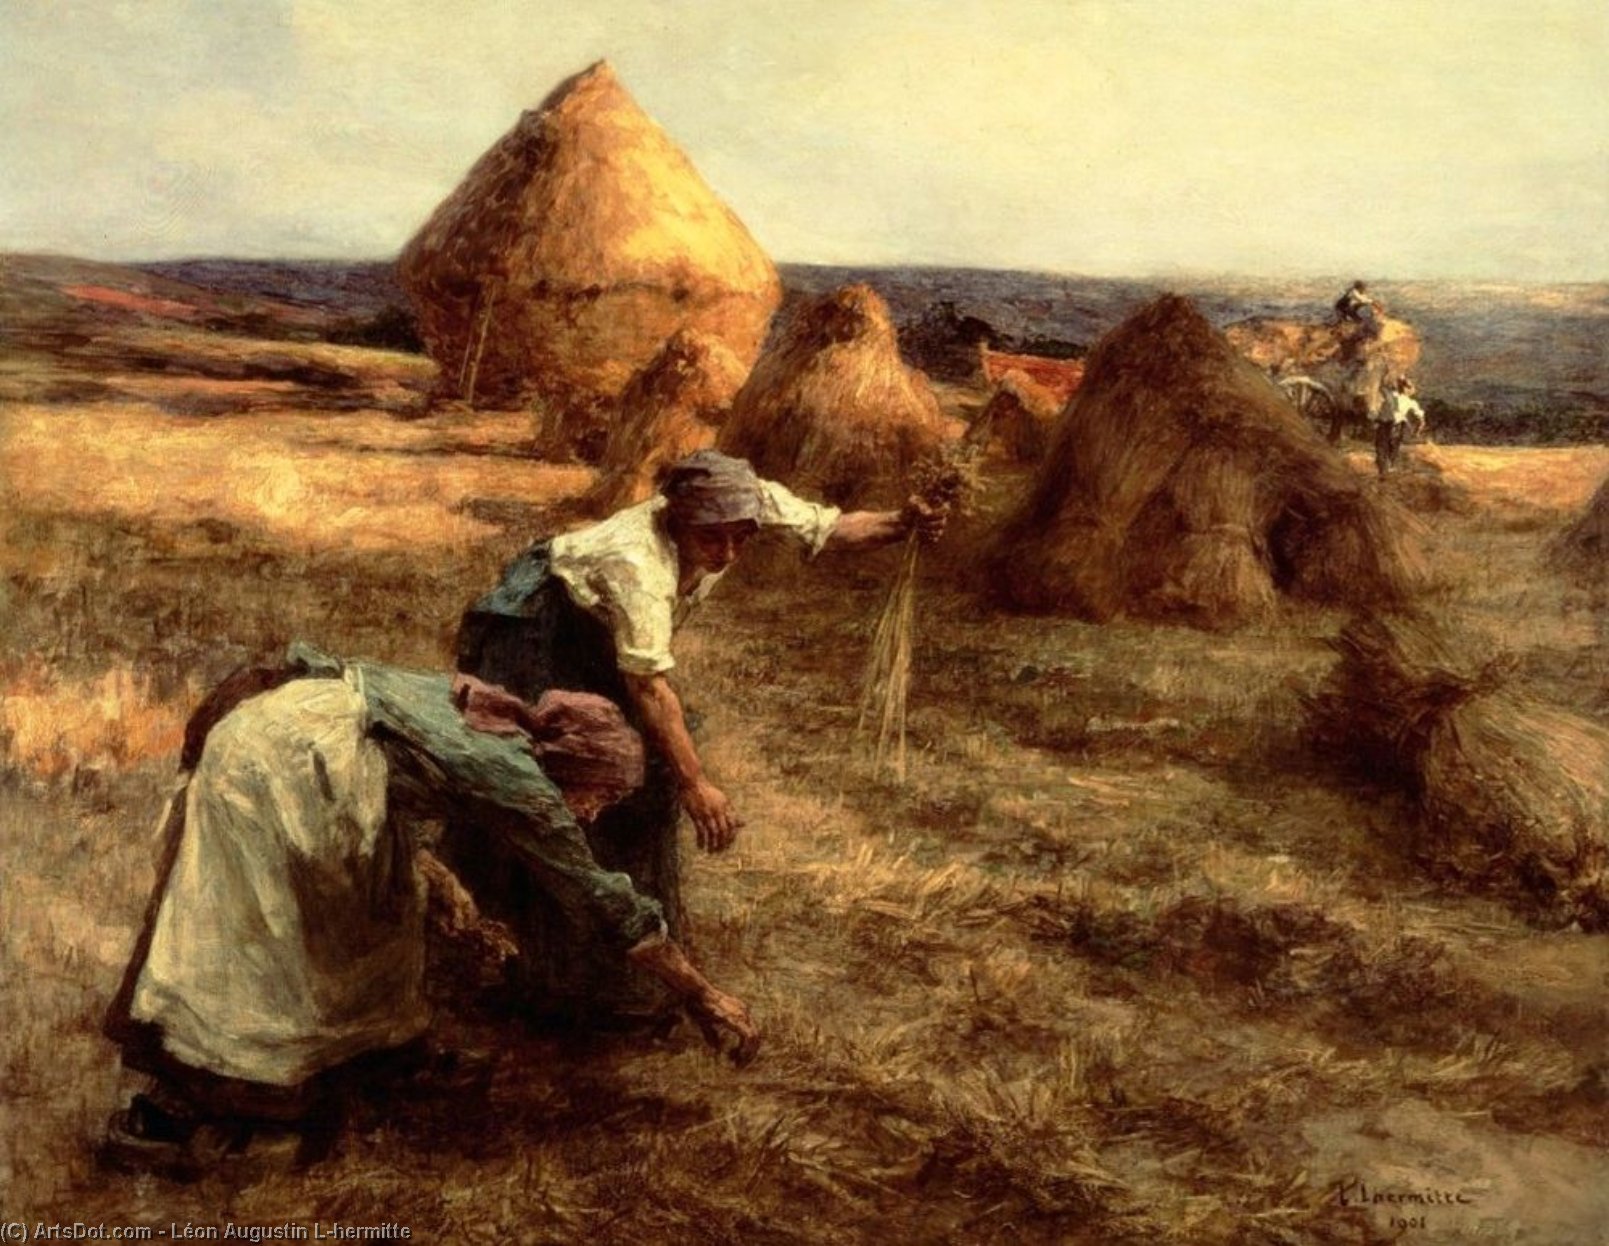 Buy Museum Art Reproductions The Gleaners by Léon Augustin L'hermitte (1844-1925, France) | ArtsDot.com